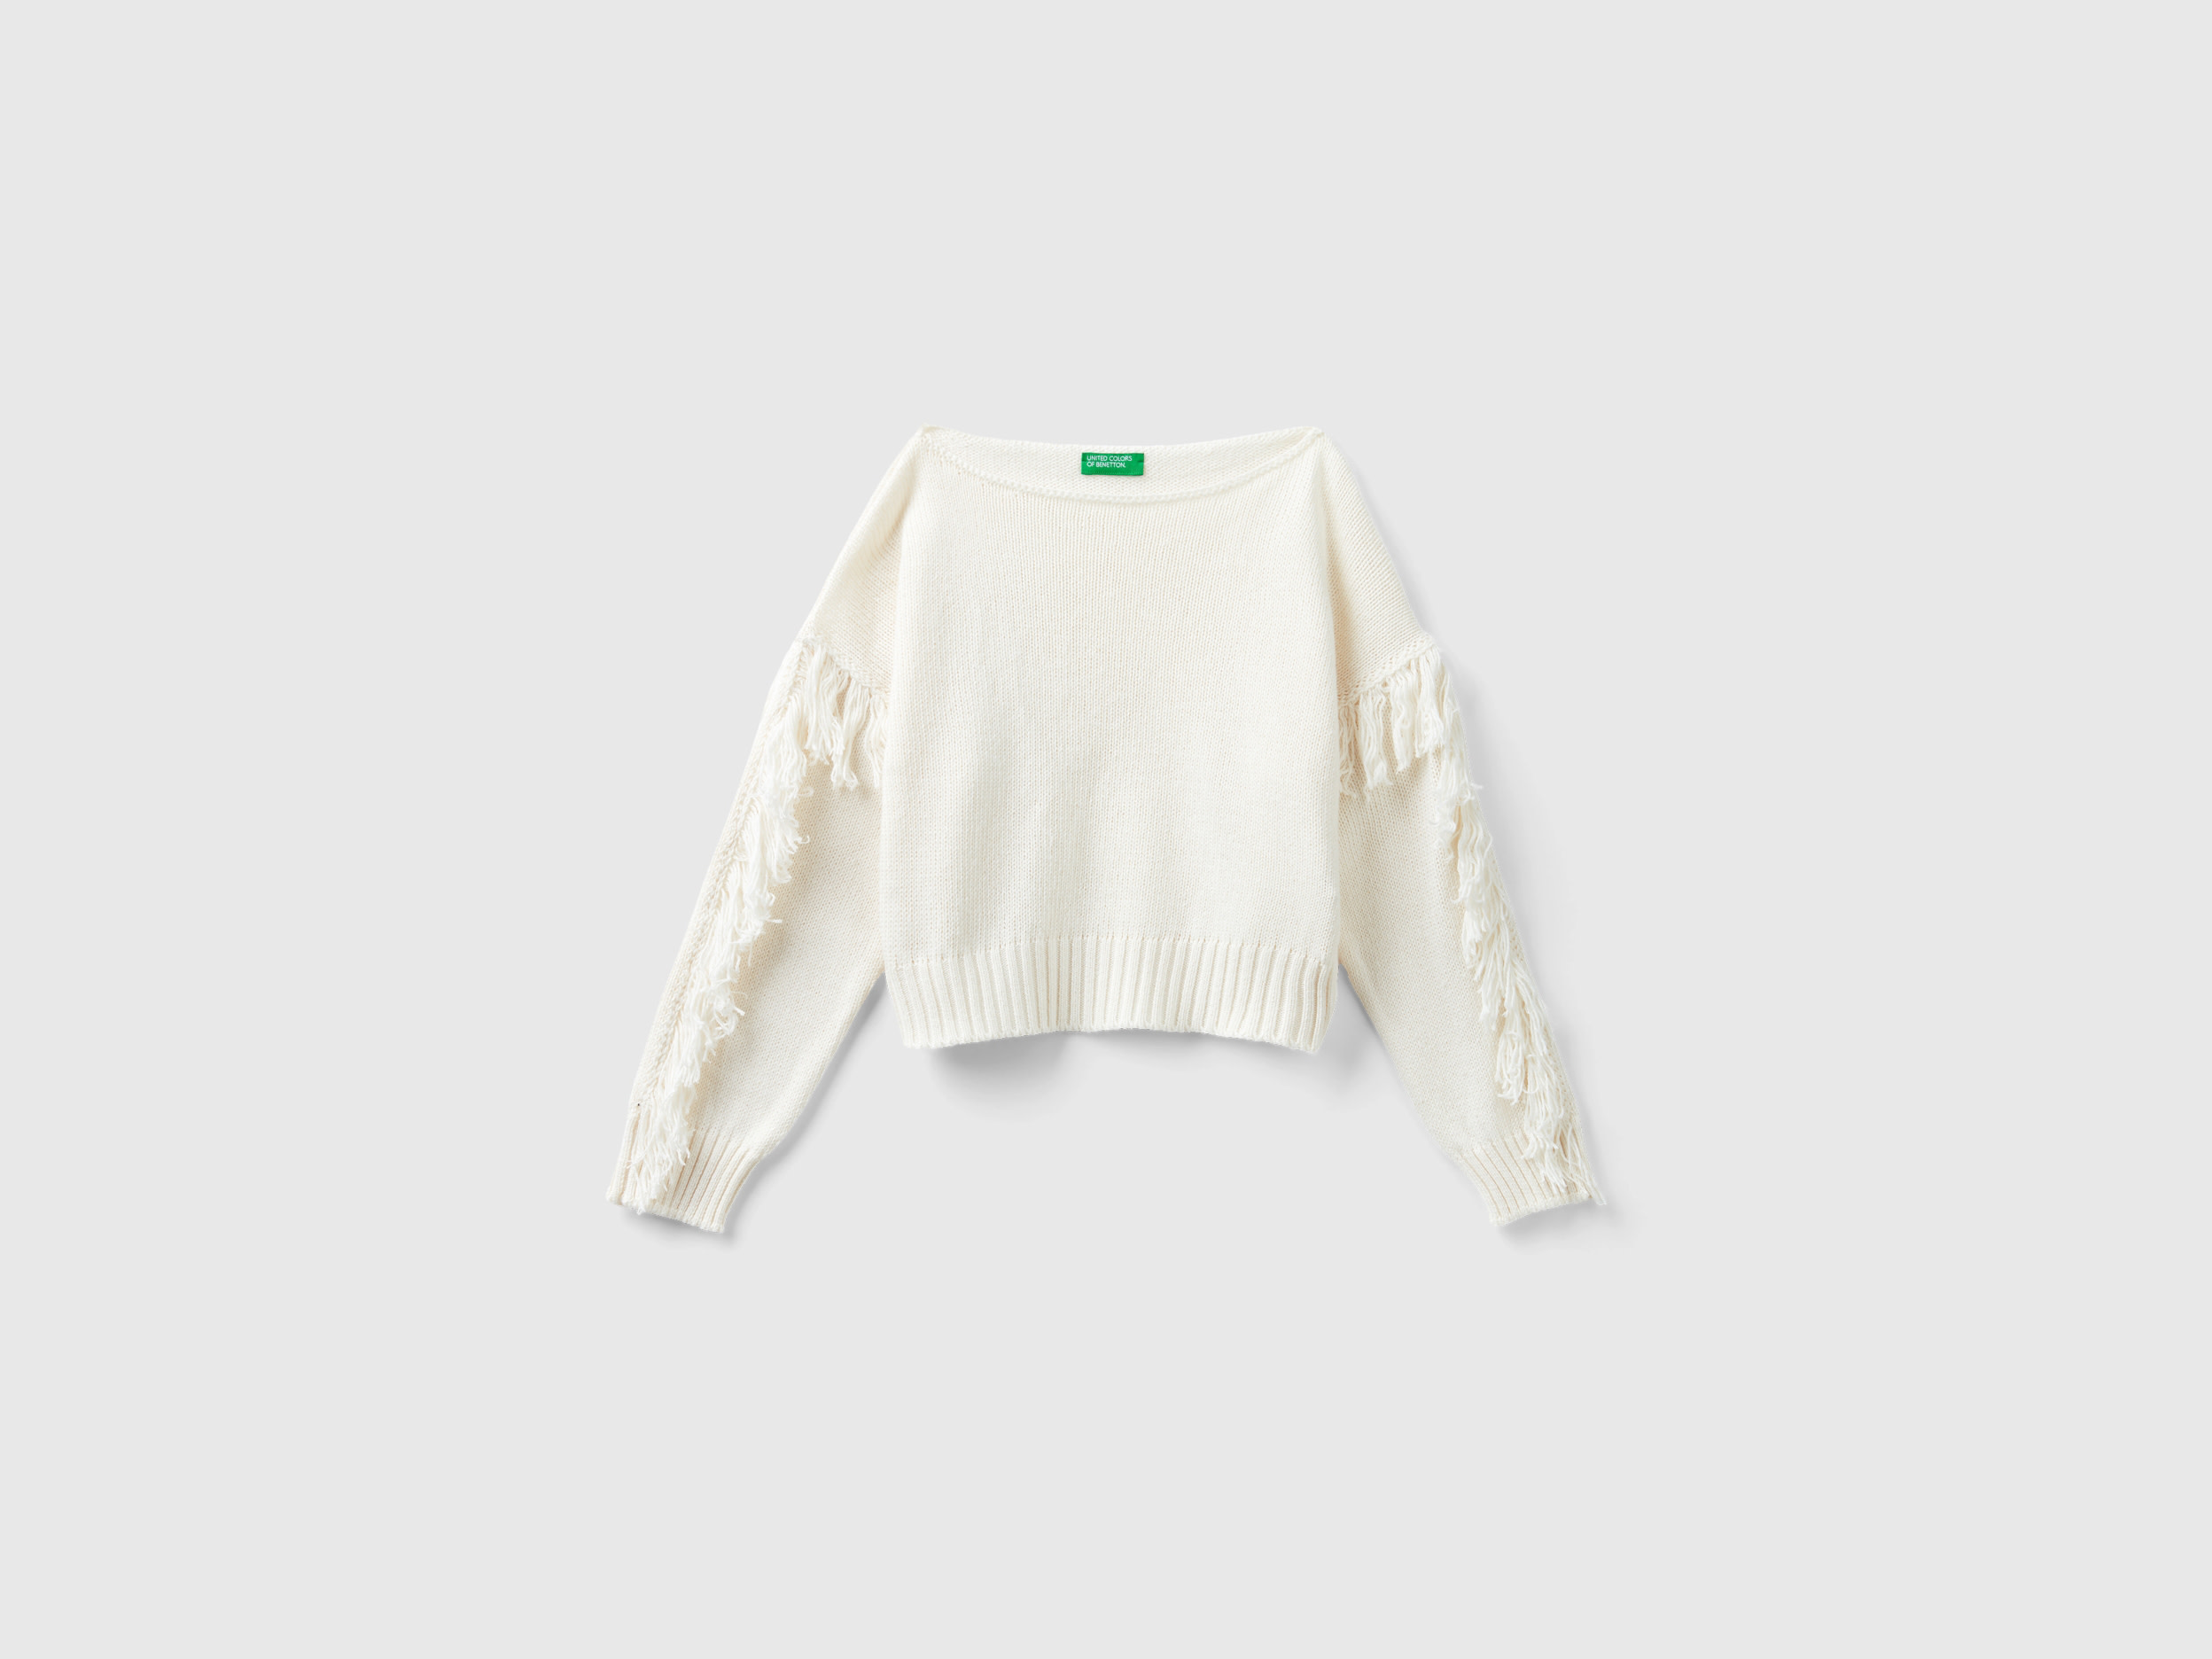 Image of Benetton, Sweater With Fringe, size L, Creamy White, Kids